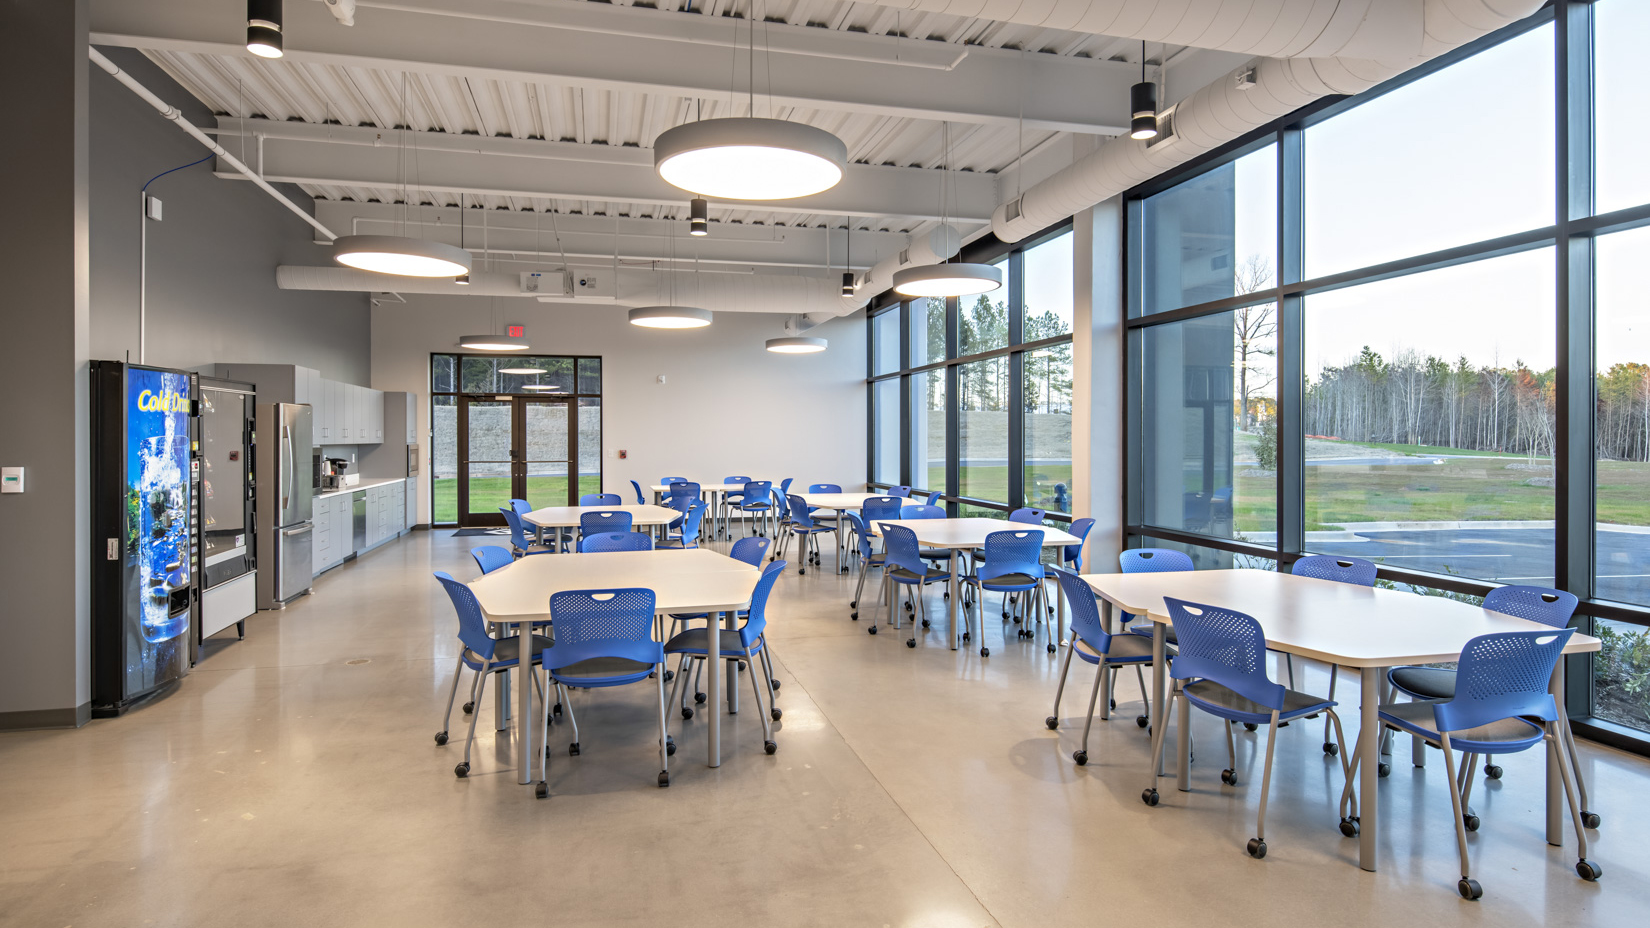 By incorporating resilient design, an employee breakroom can be transformed into a space for corporate events and back again. Pictured here: TrueCore's Laurens, SC manufacturing facility.